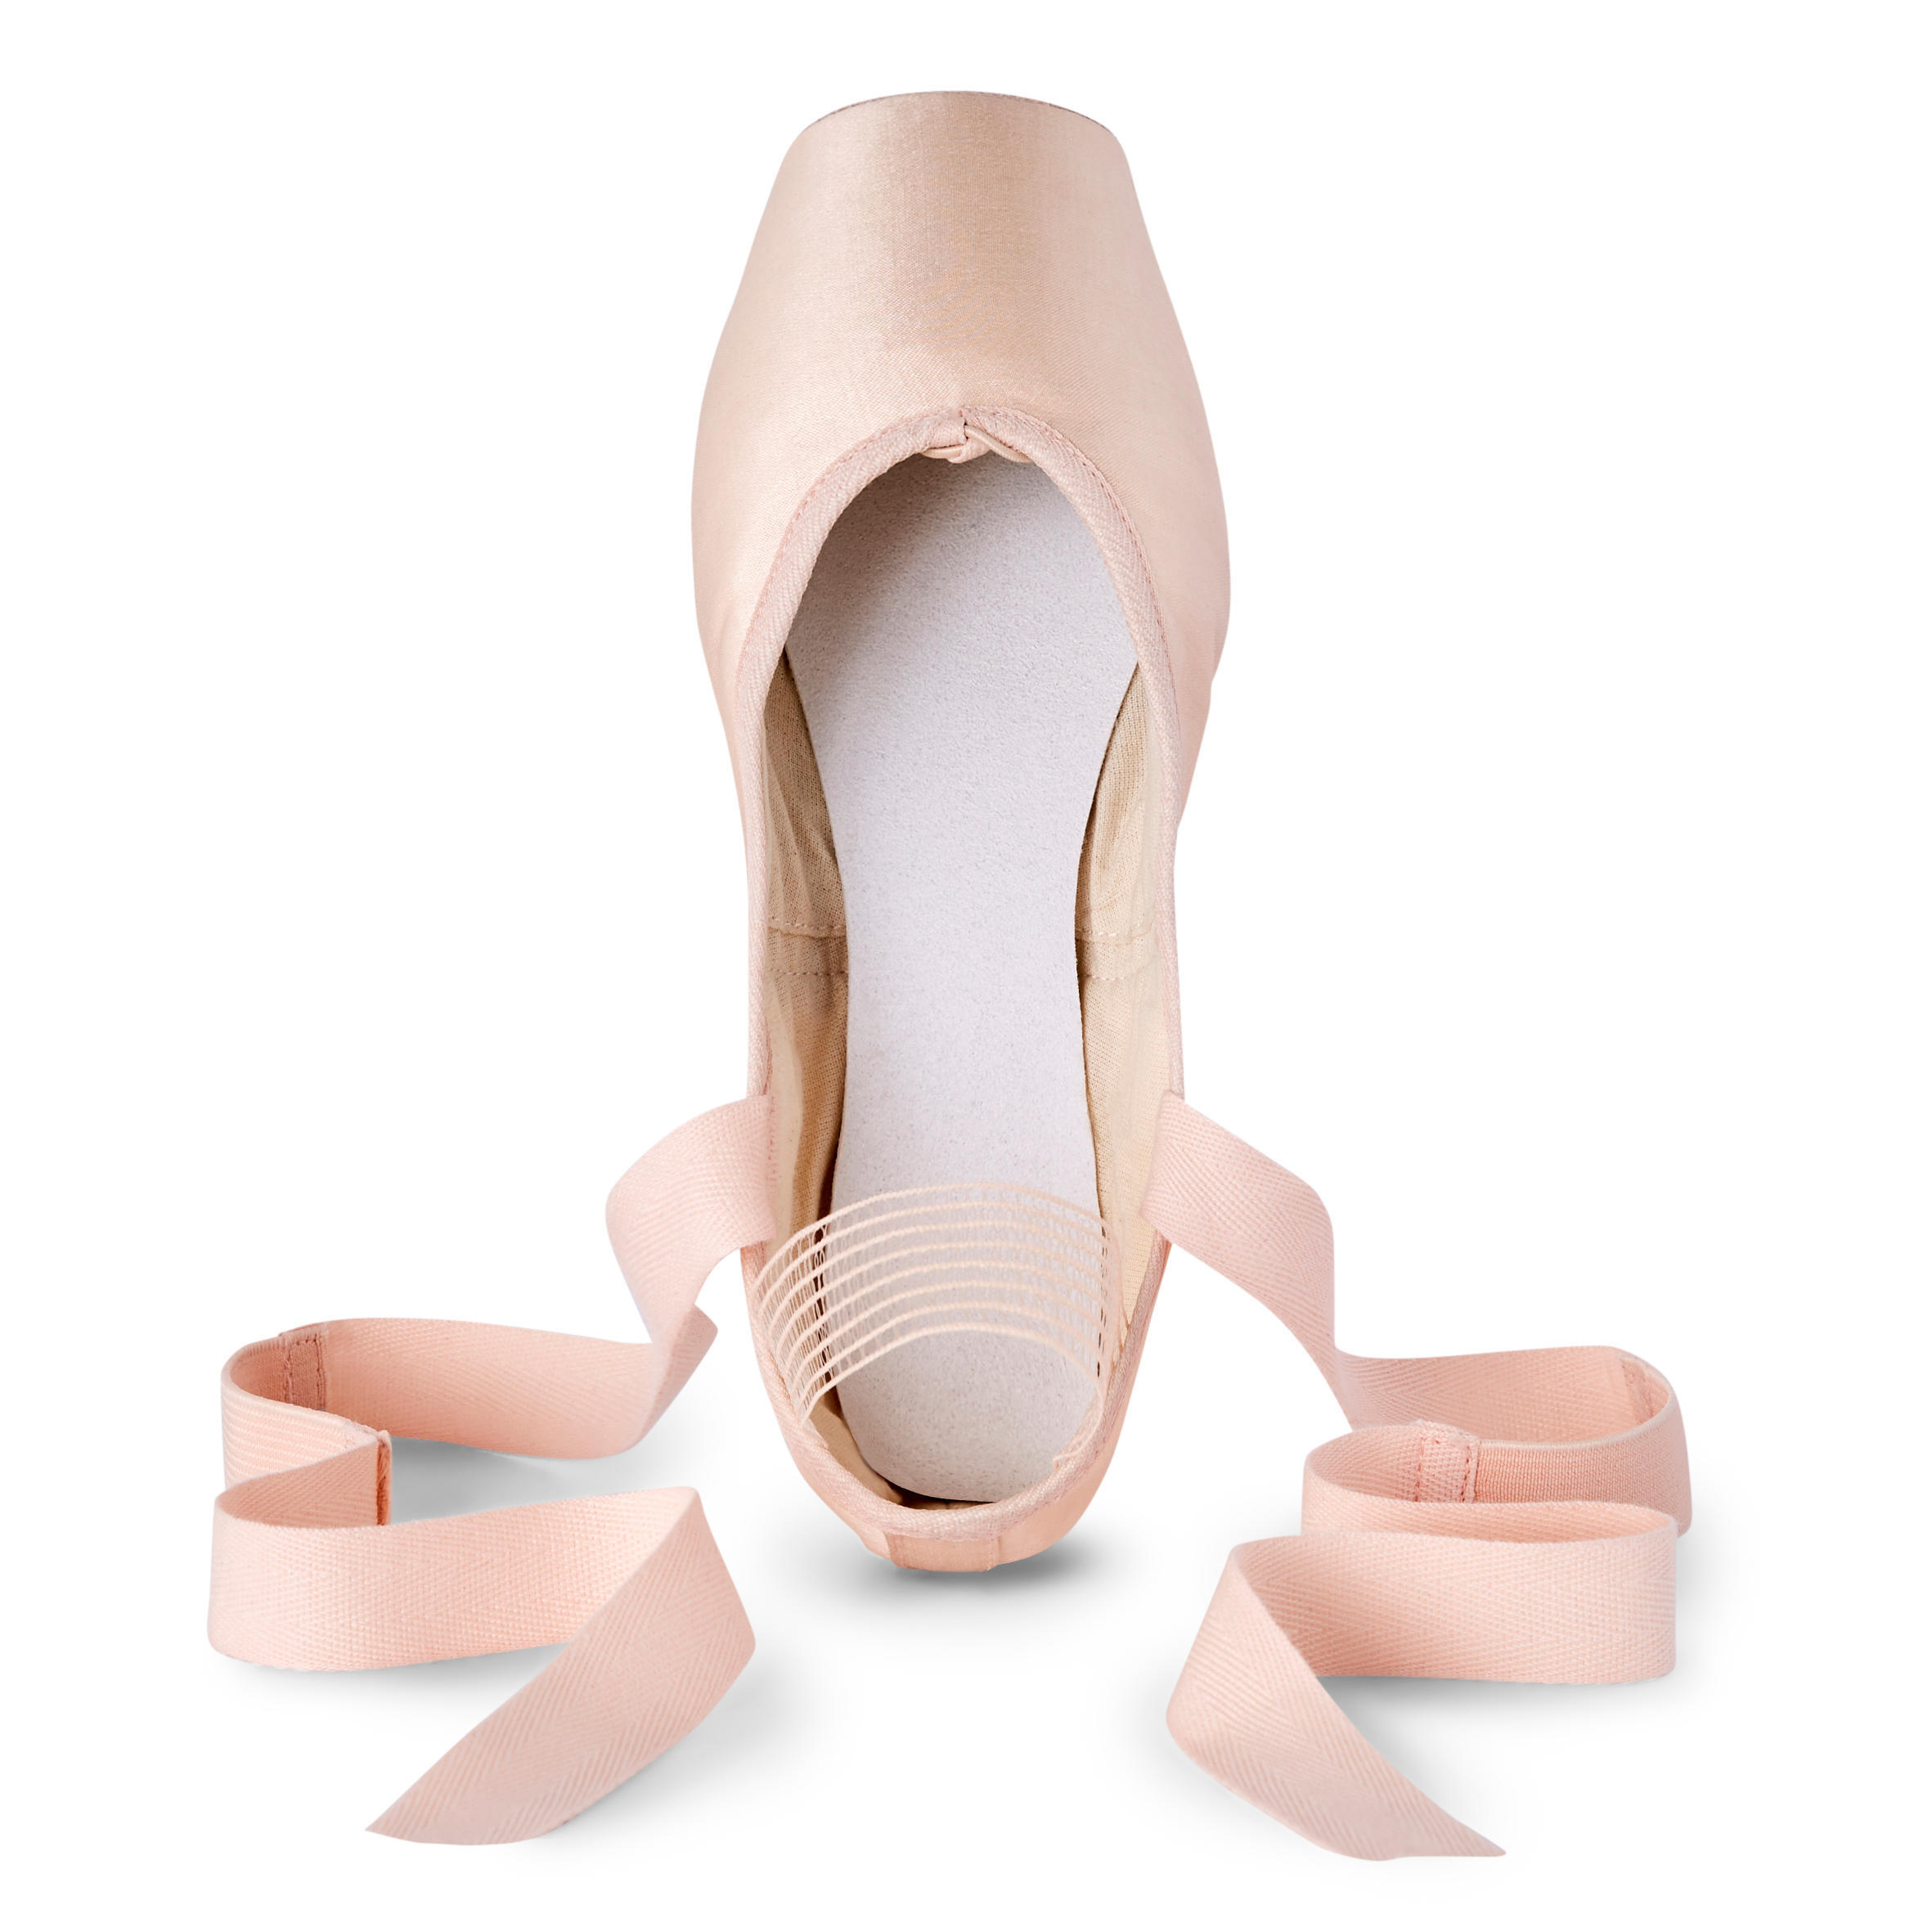 Beginner Pointe Shoes with Flexible Soles - Sizes 1 to 8 5/6